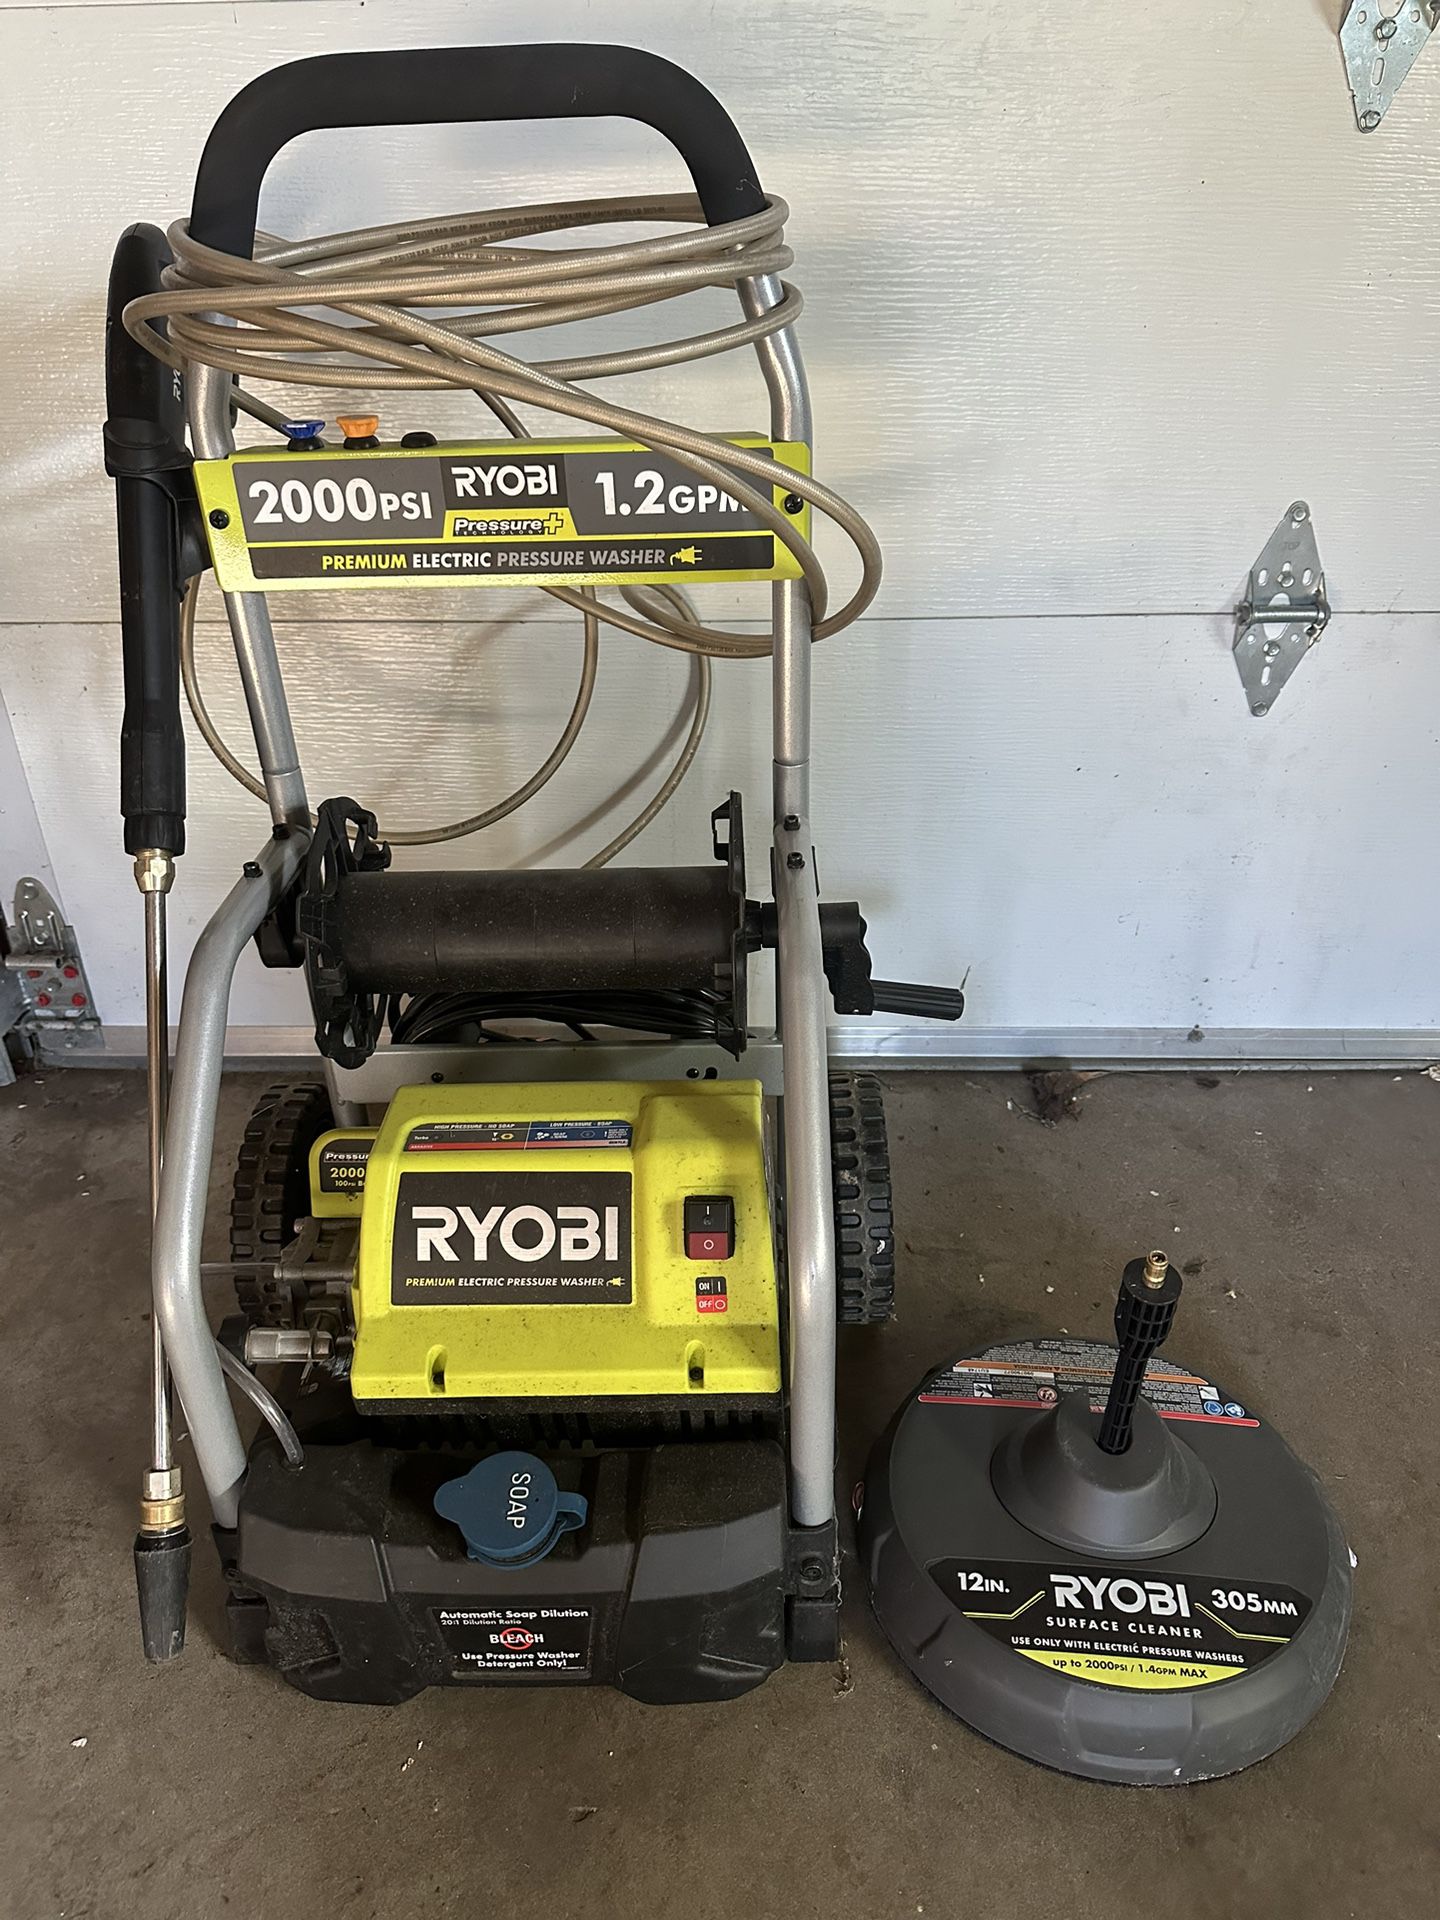 Ryobi 2000psi Electric Pressure Washer + Surface Cleaner